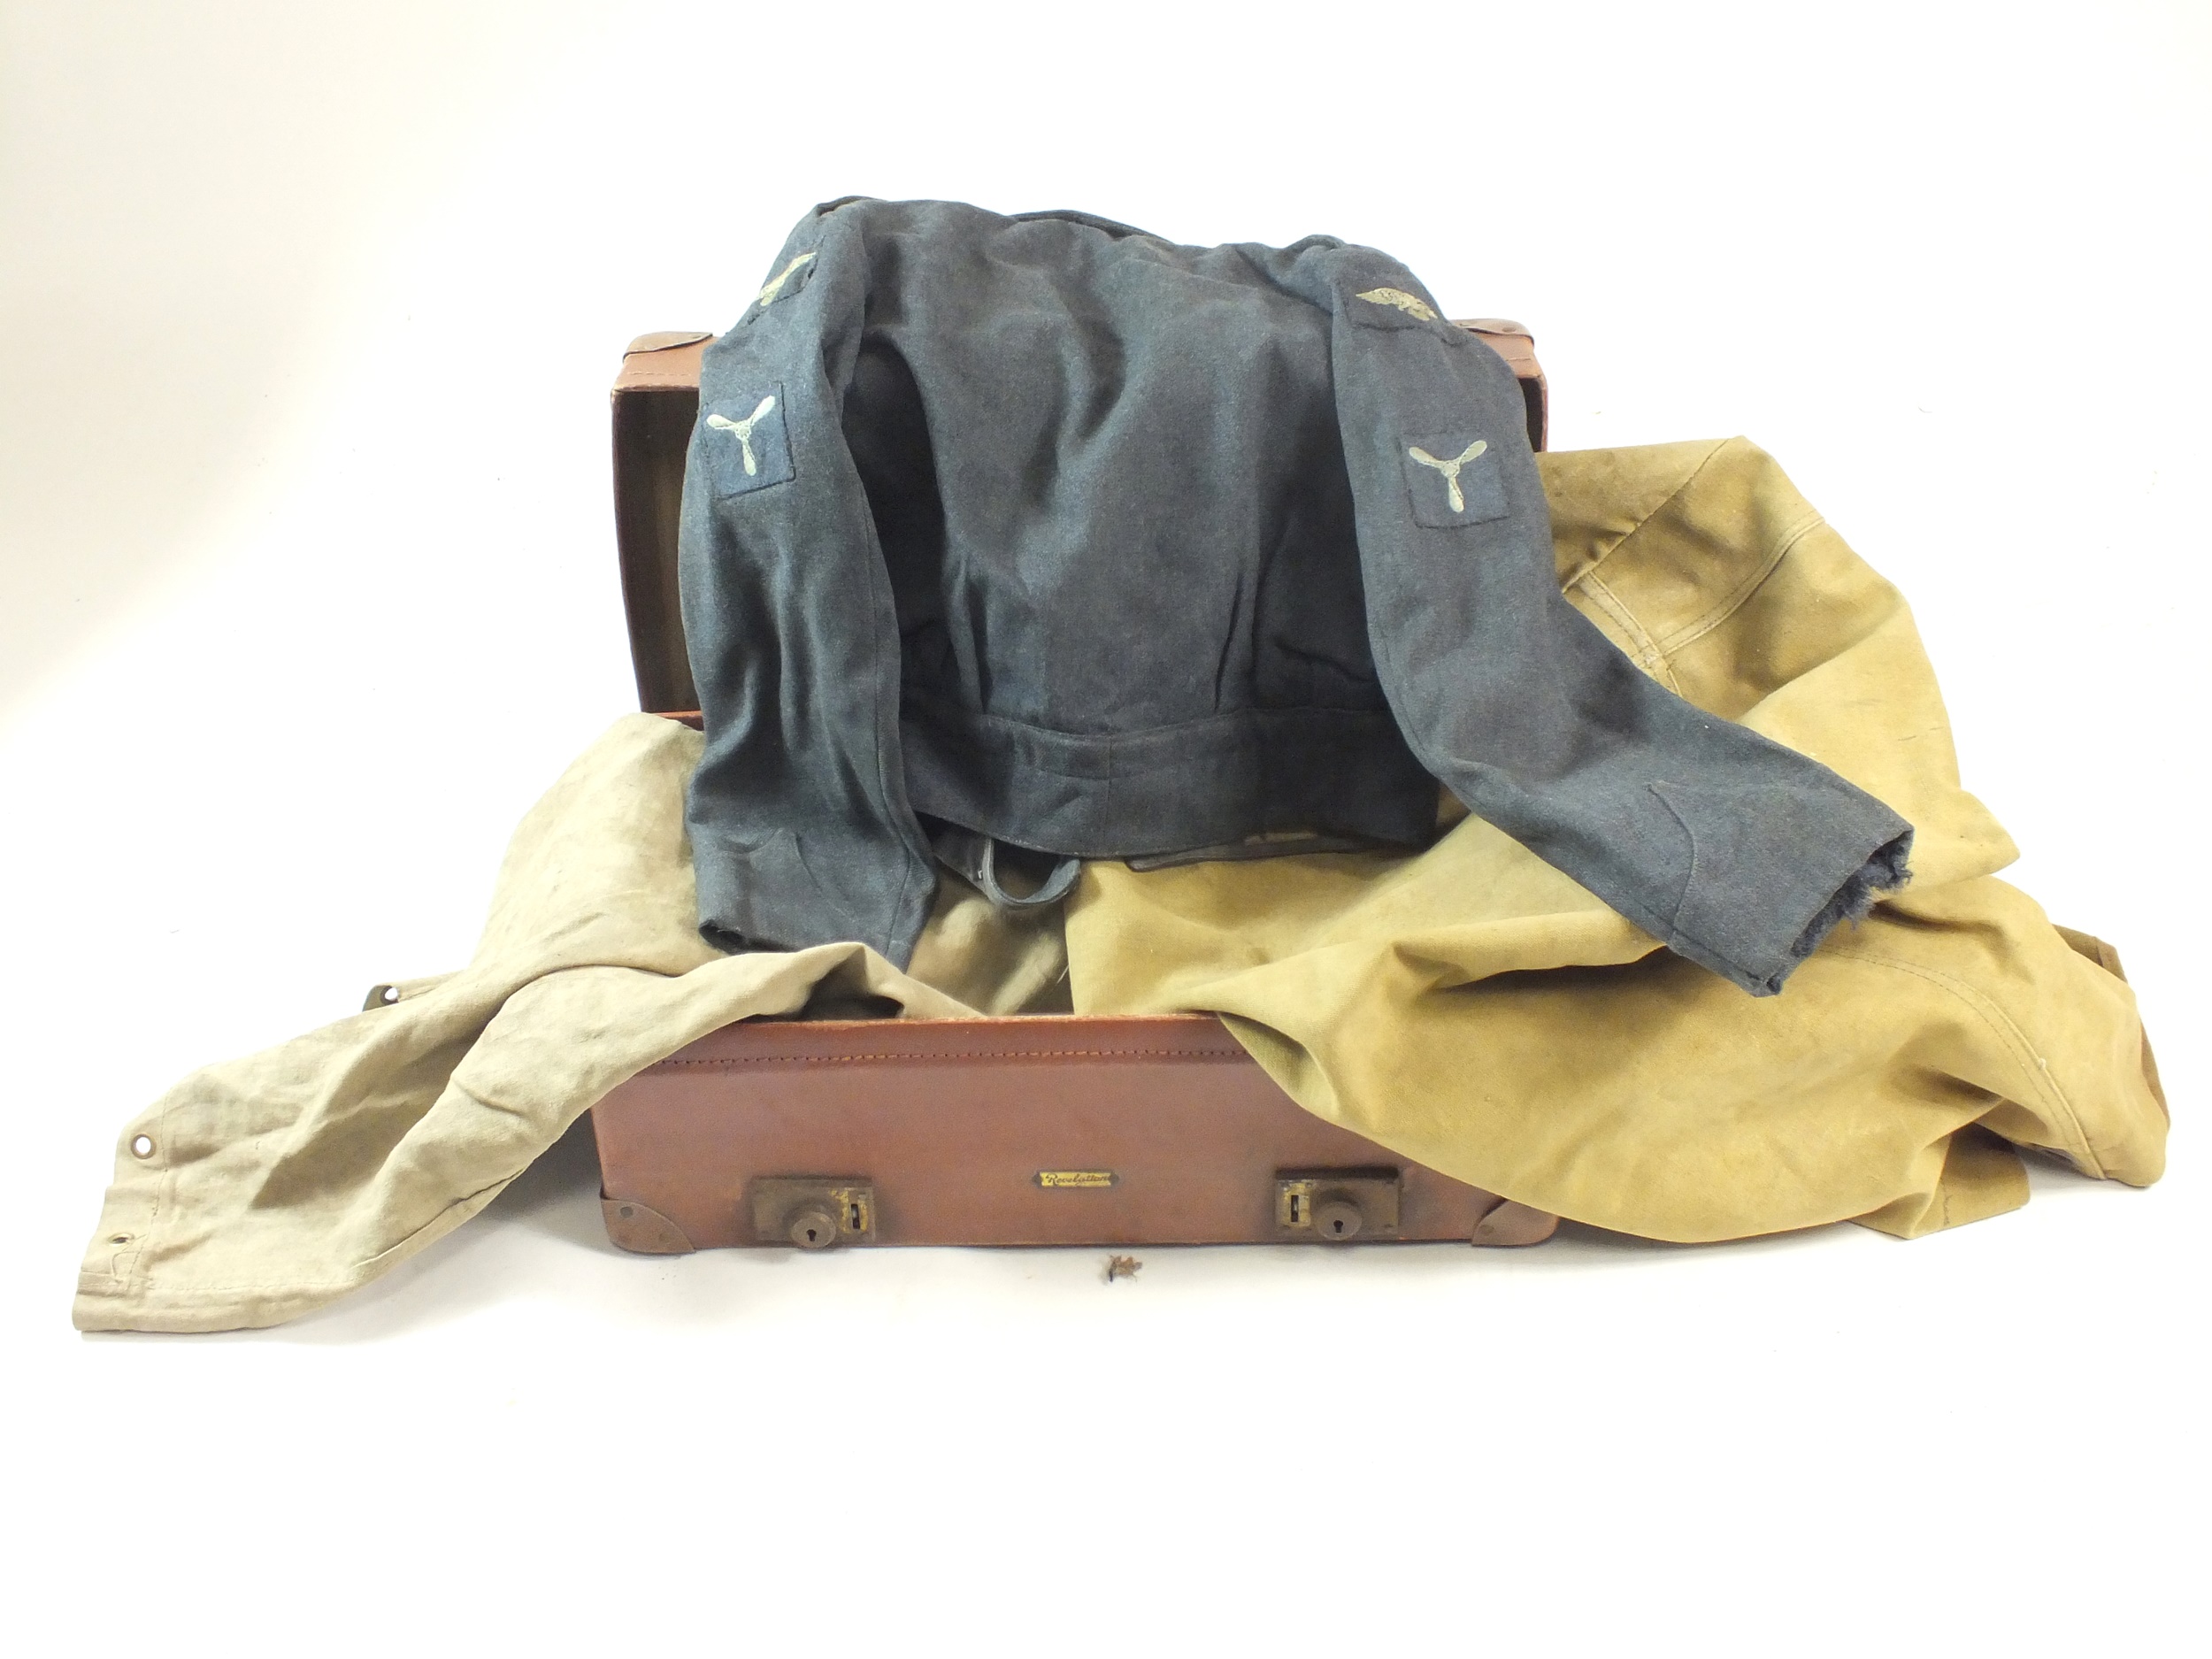 A spotting scope and RAF uniform - Image 2 of 9